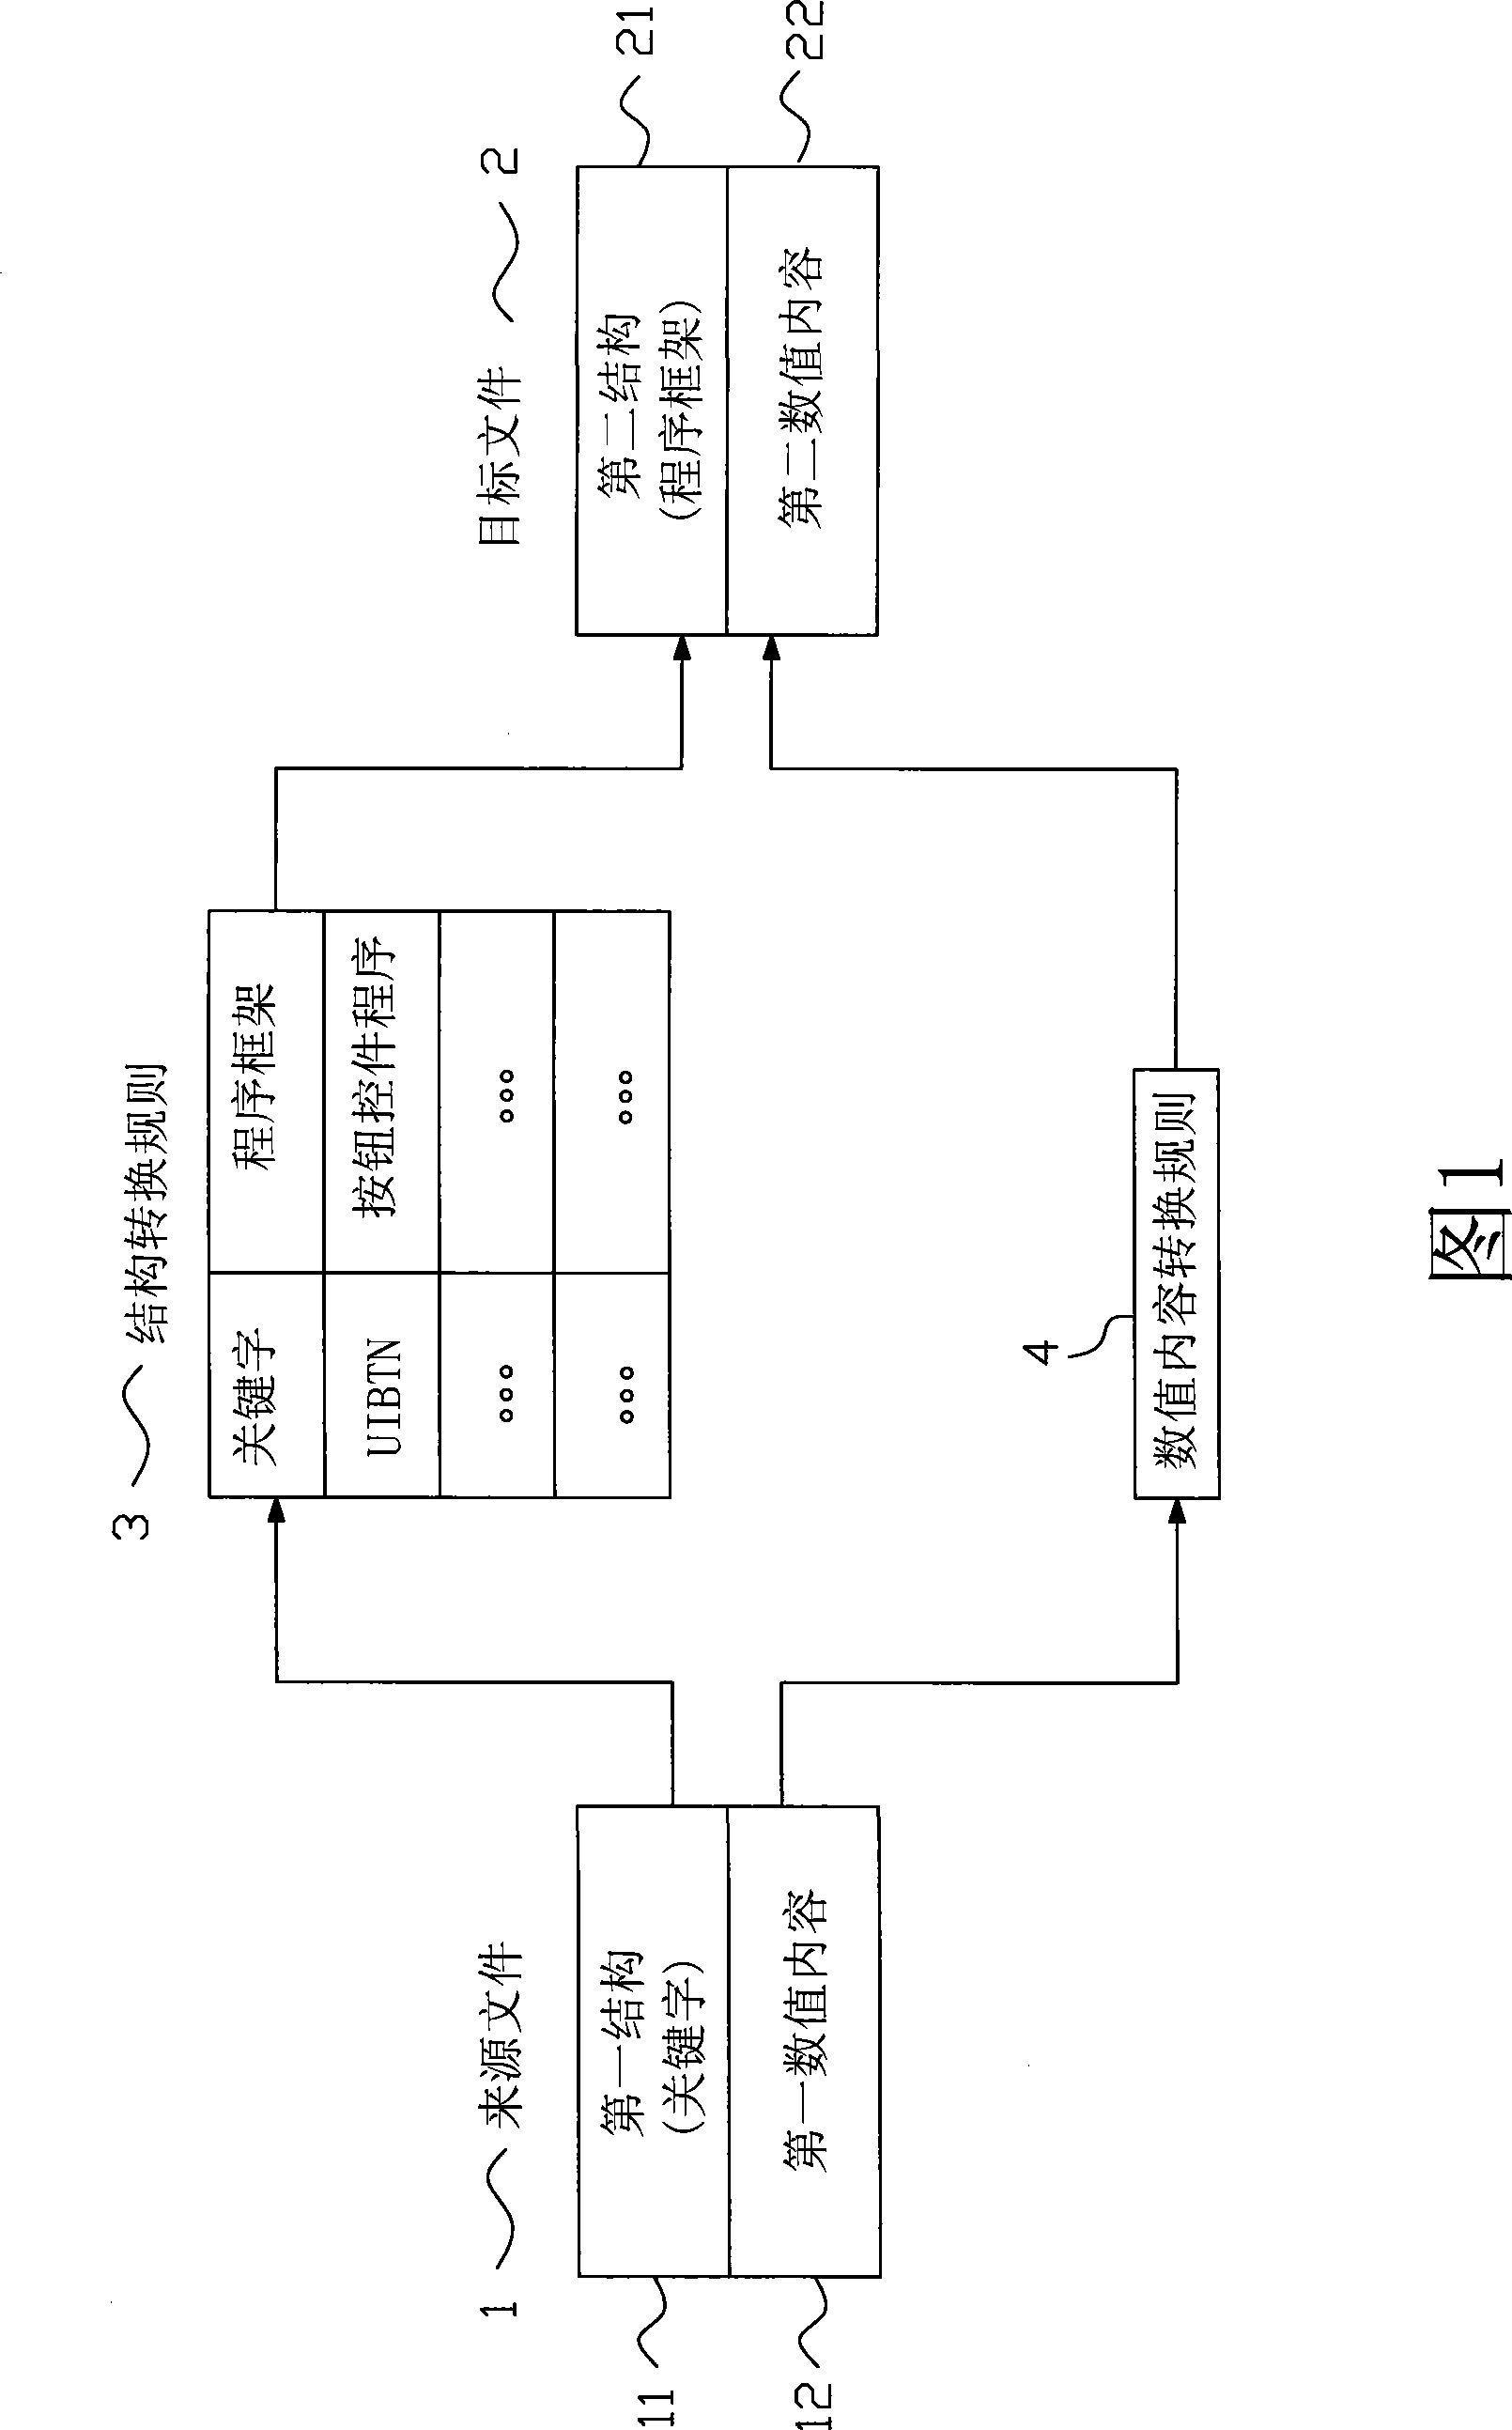 Electronic file conversion system and method